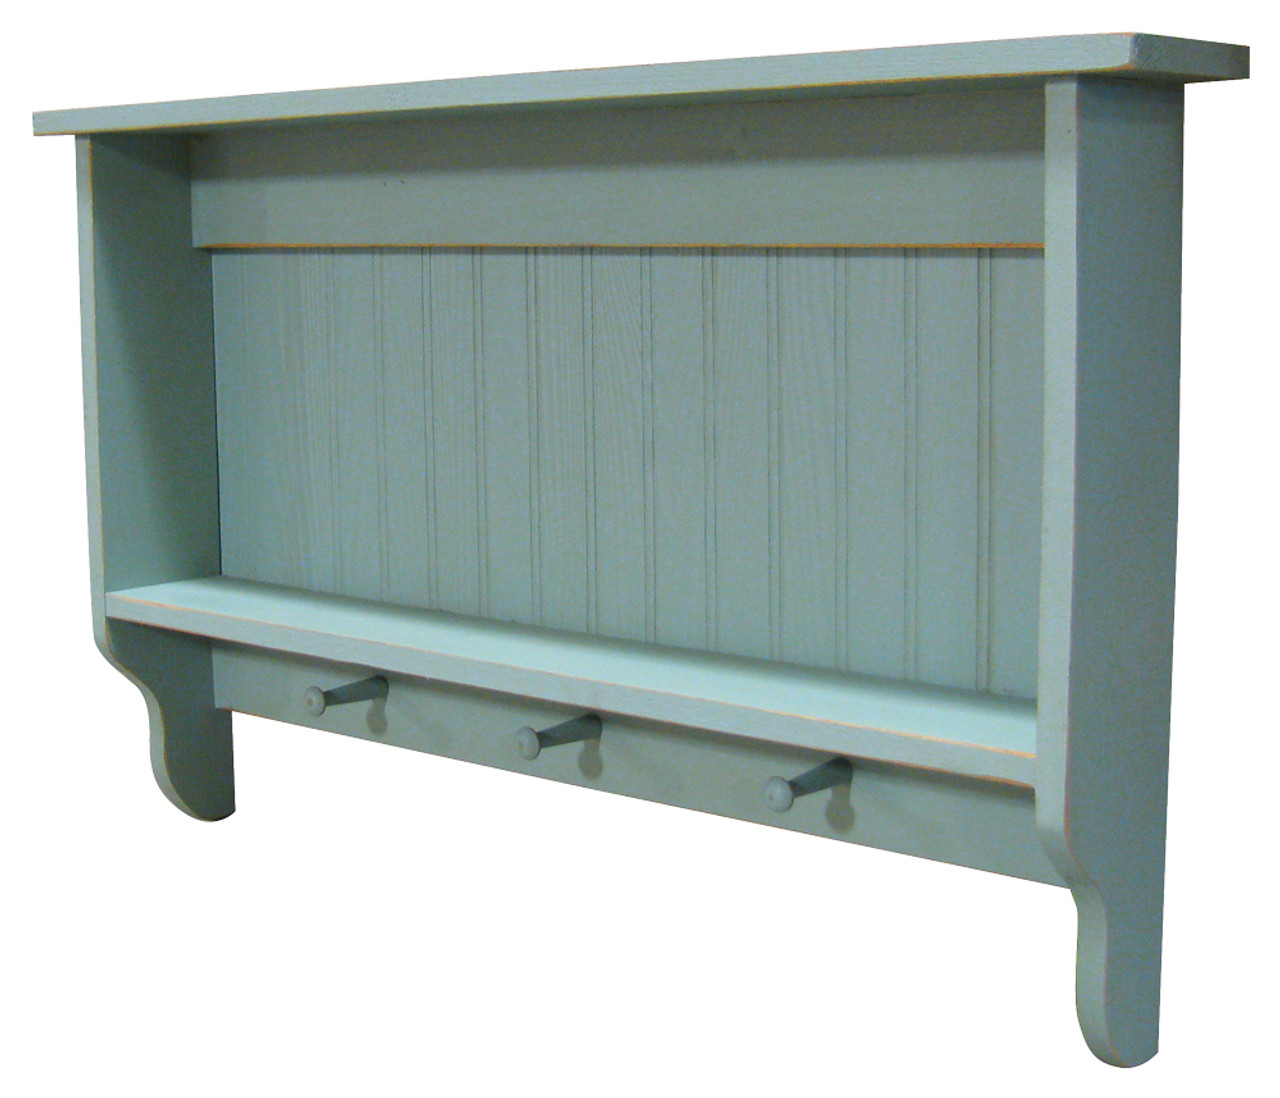 Wall Shelf Unit 3' wide, Wooden Wall Shelves with Pegs